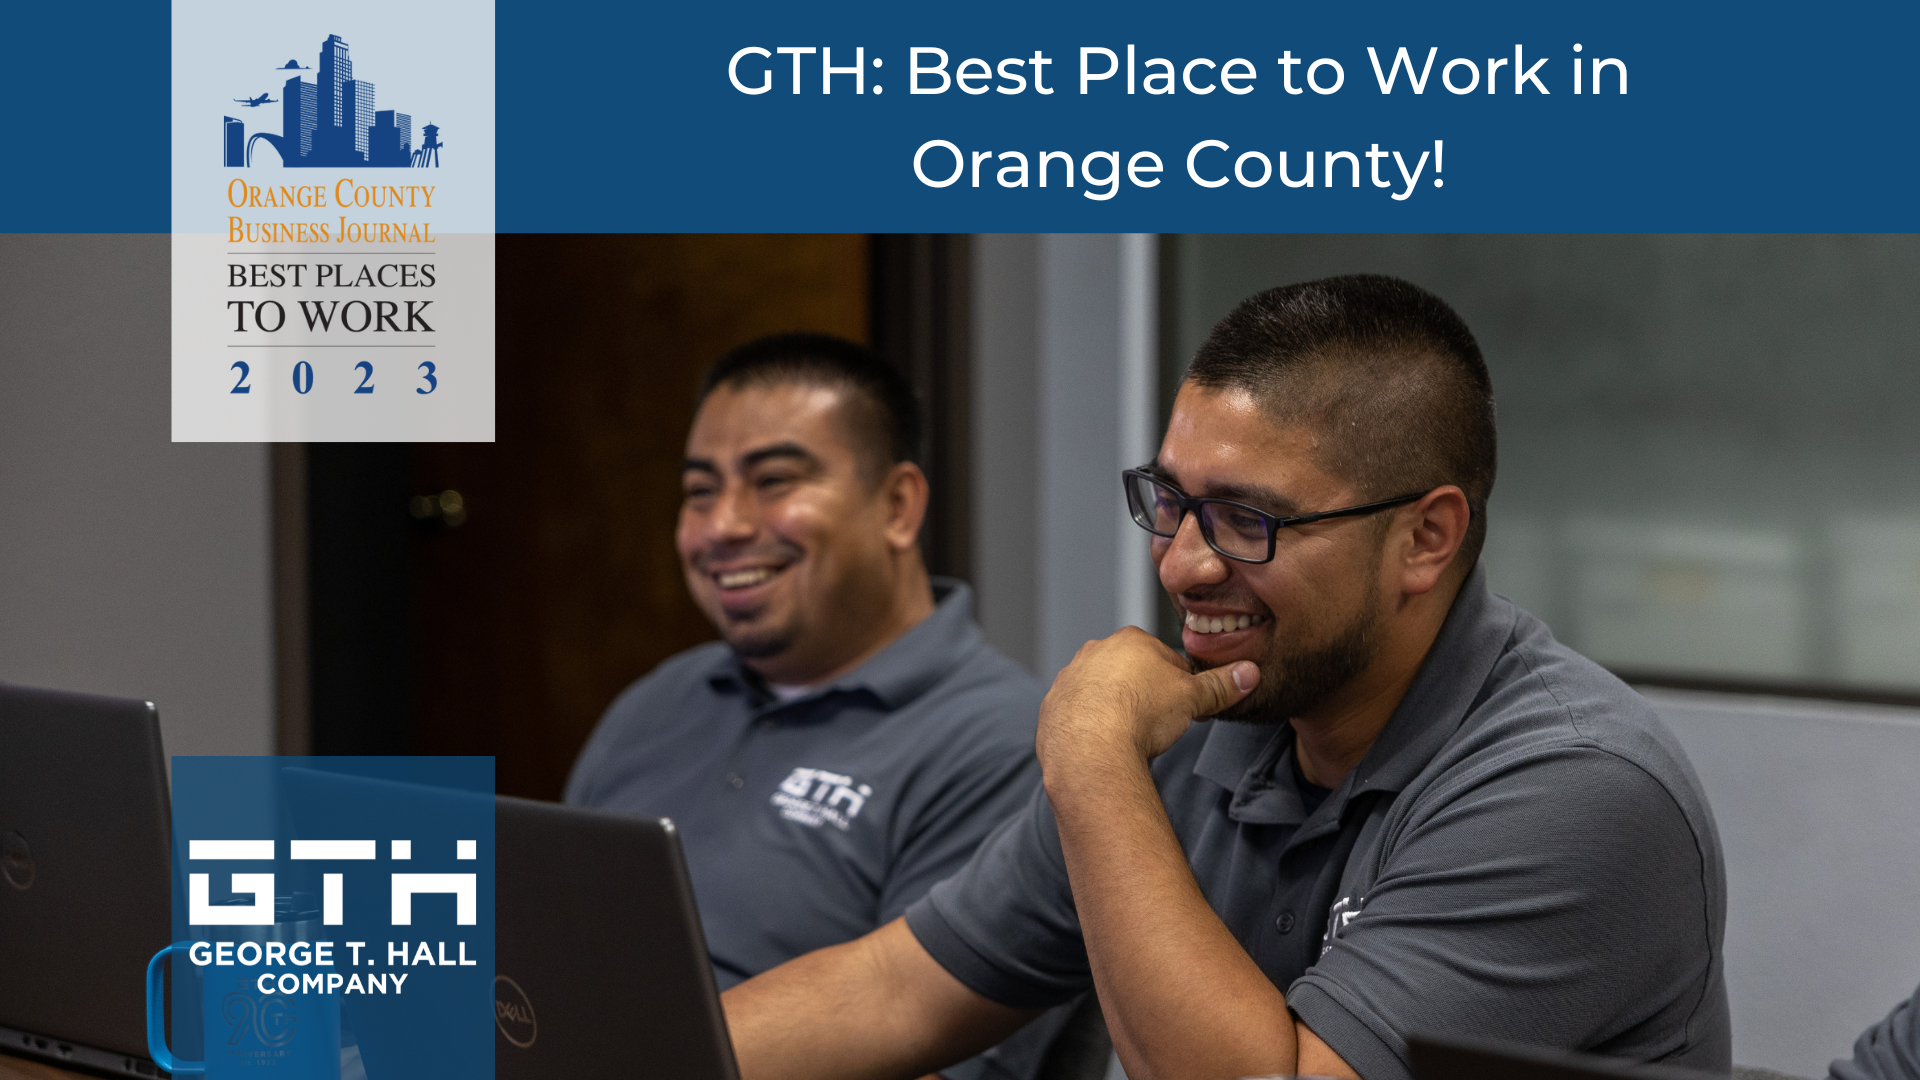 GTH: Best Place to Work in Orange County